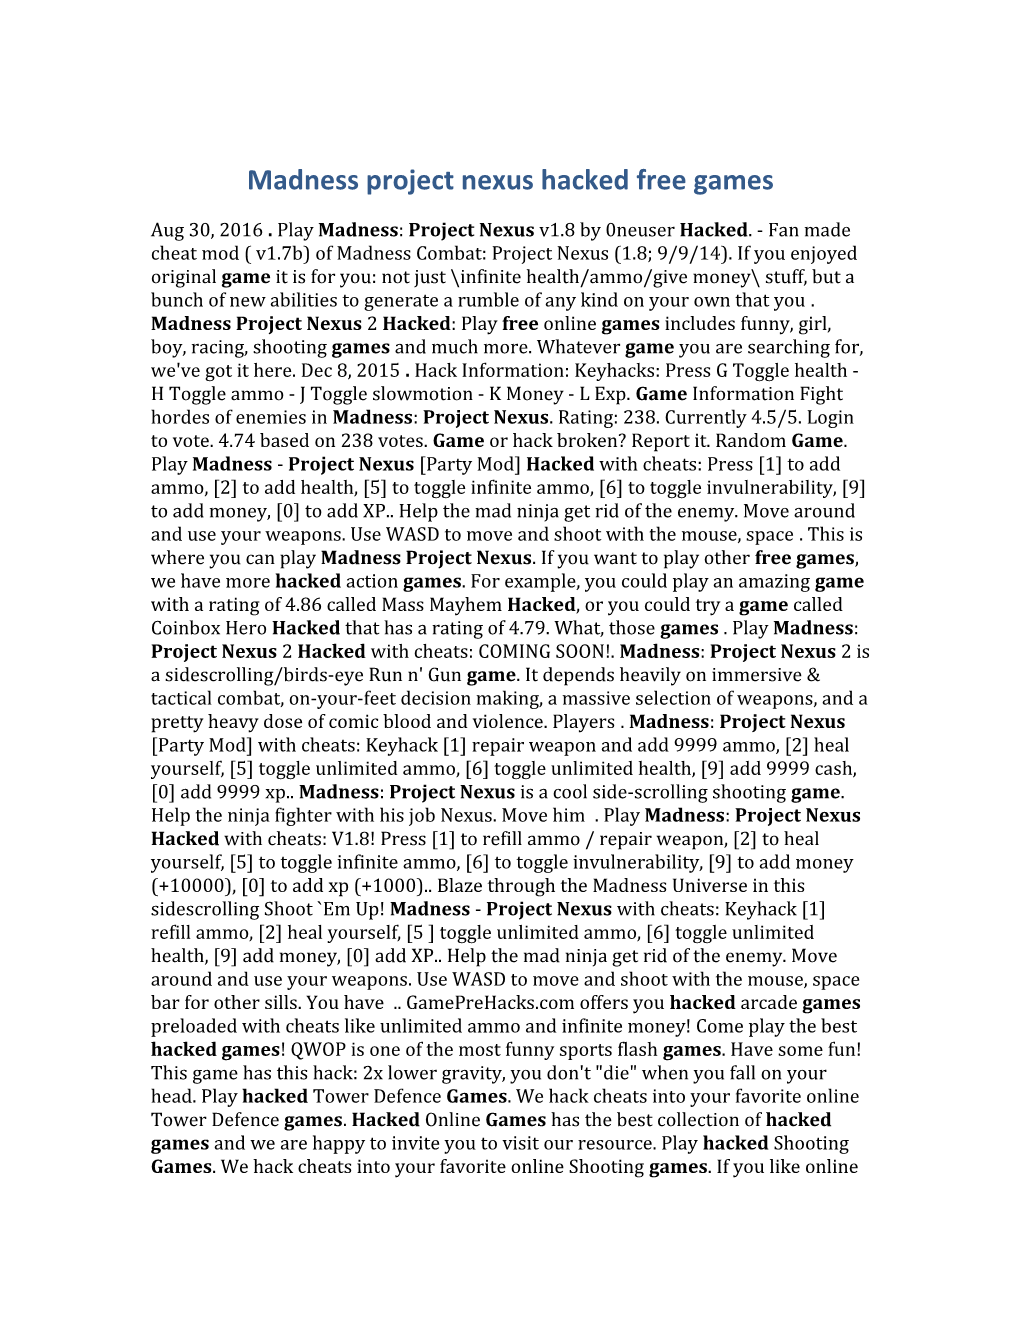 Madness Project Nexus Hacked Free Games